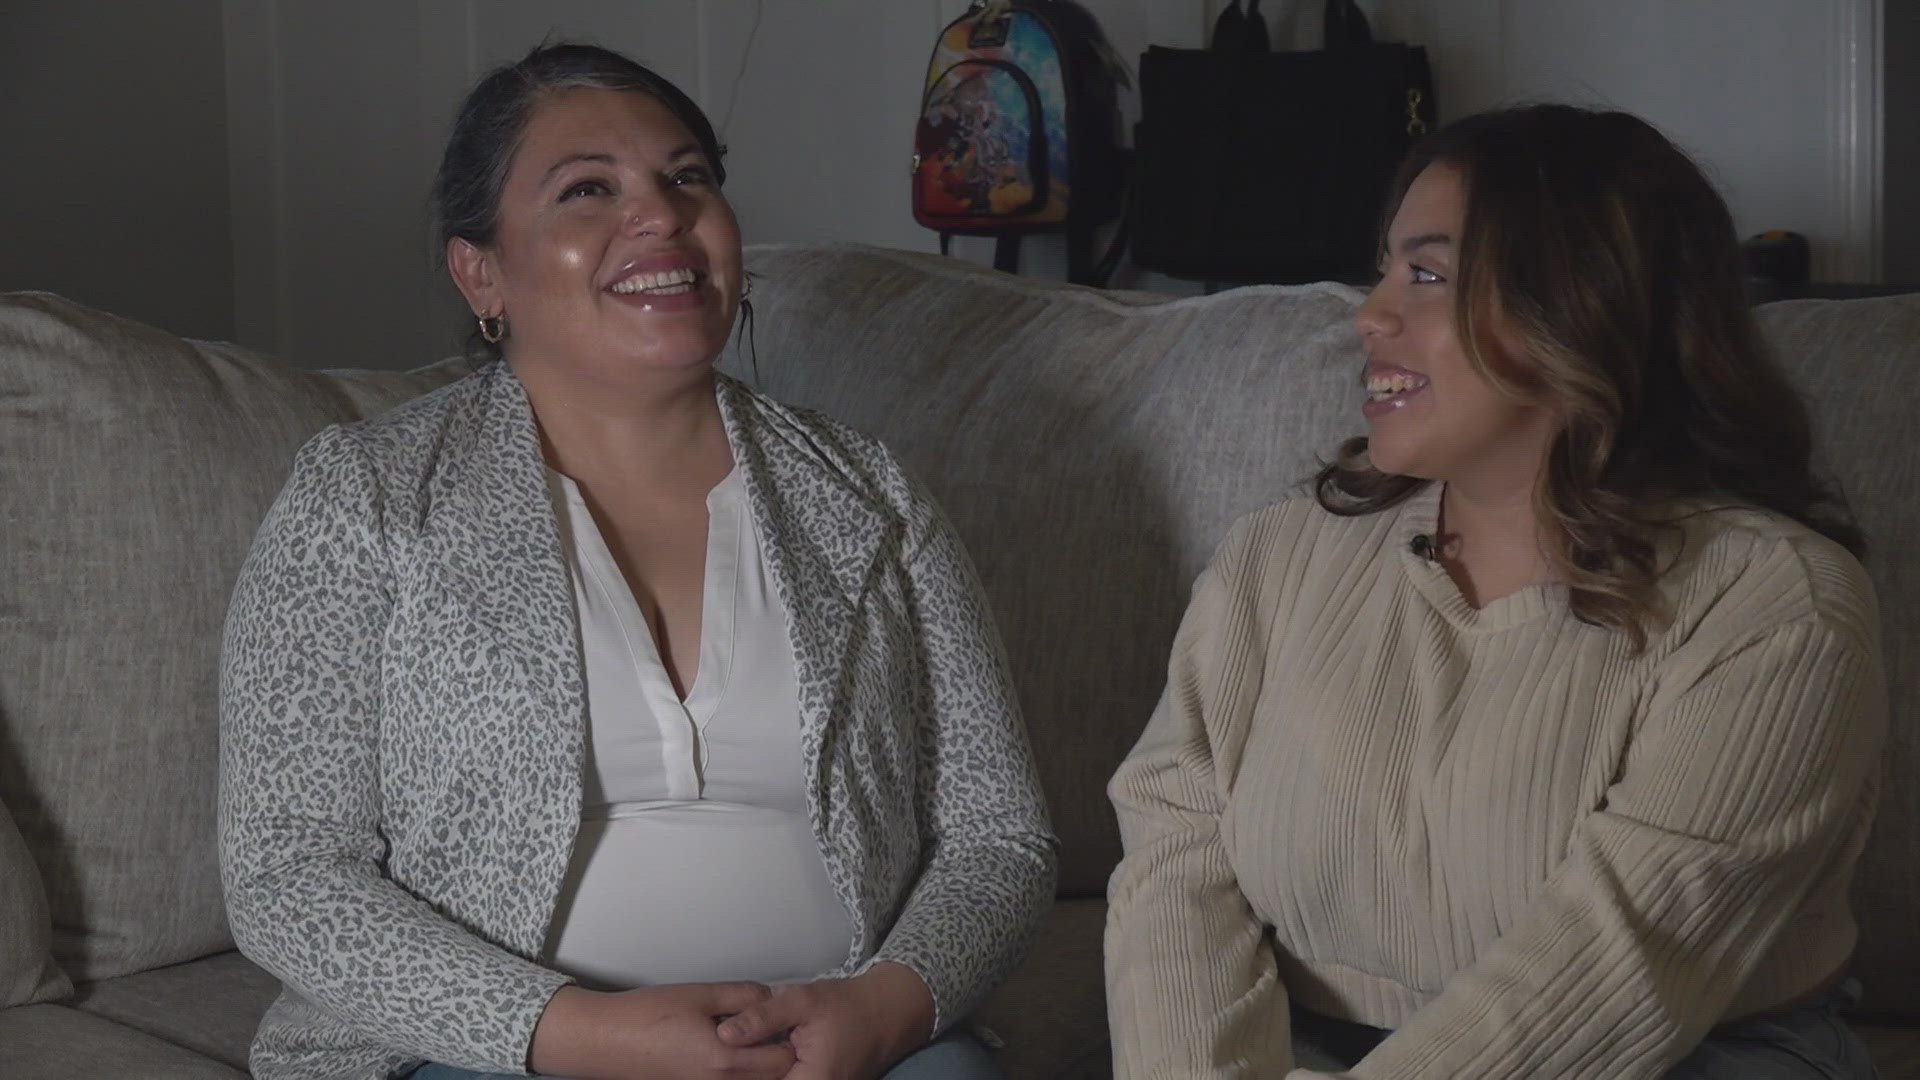 Sylvia Cabriales won her battle with kidney cancer and her daughter Madeline is graduating at 19 years old. Both are first-generation graduates in their family.